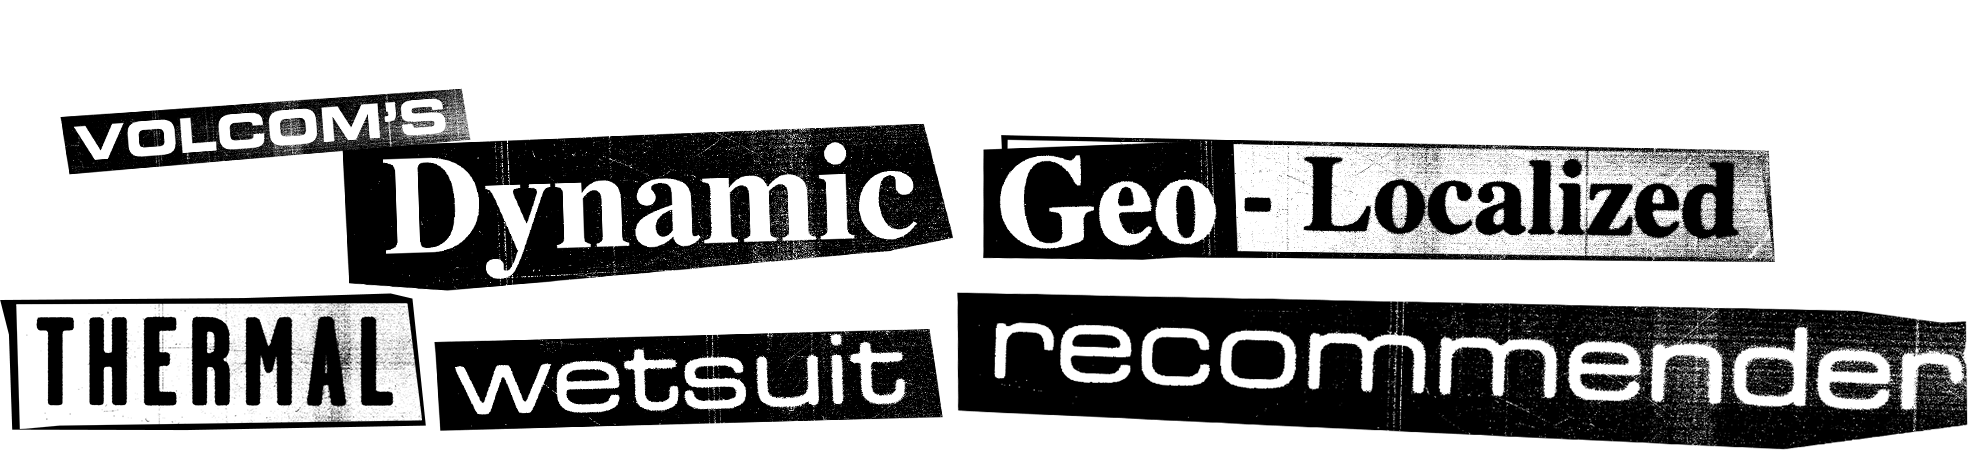 volcom's dynamic geo-localized thermo wetsuit recommender